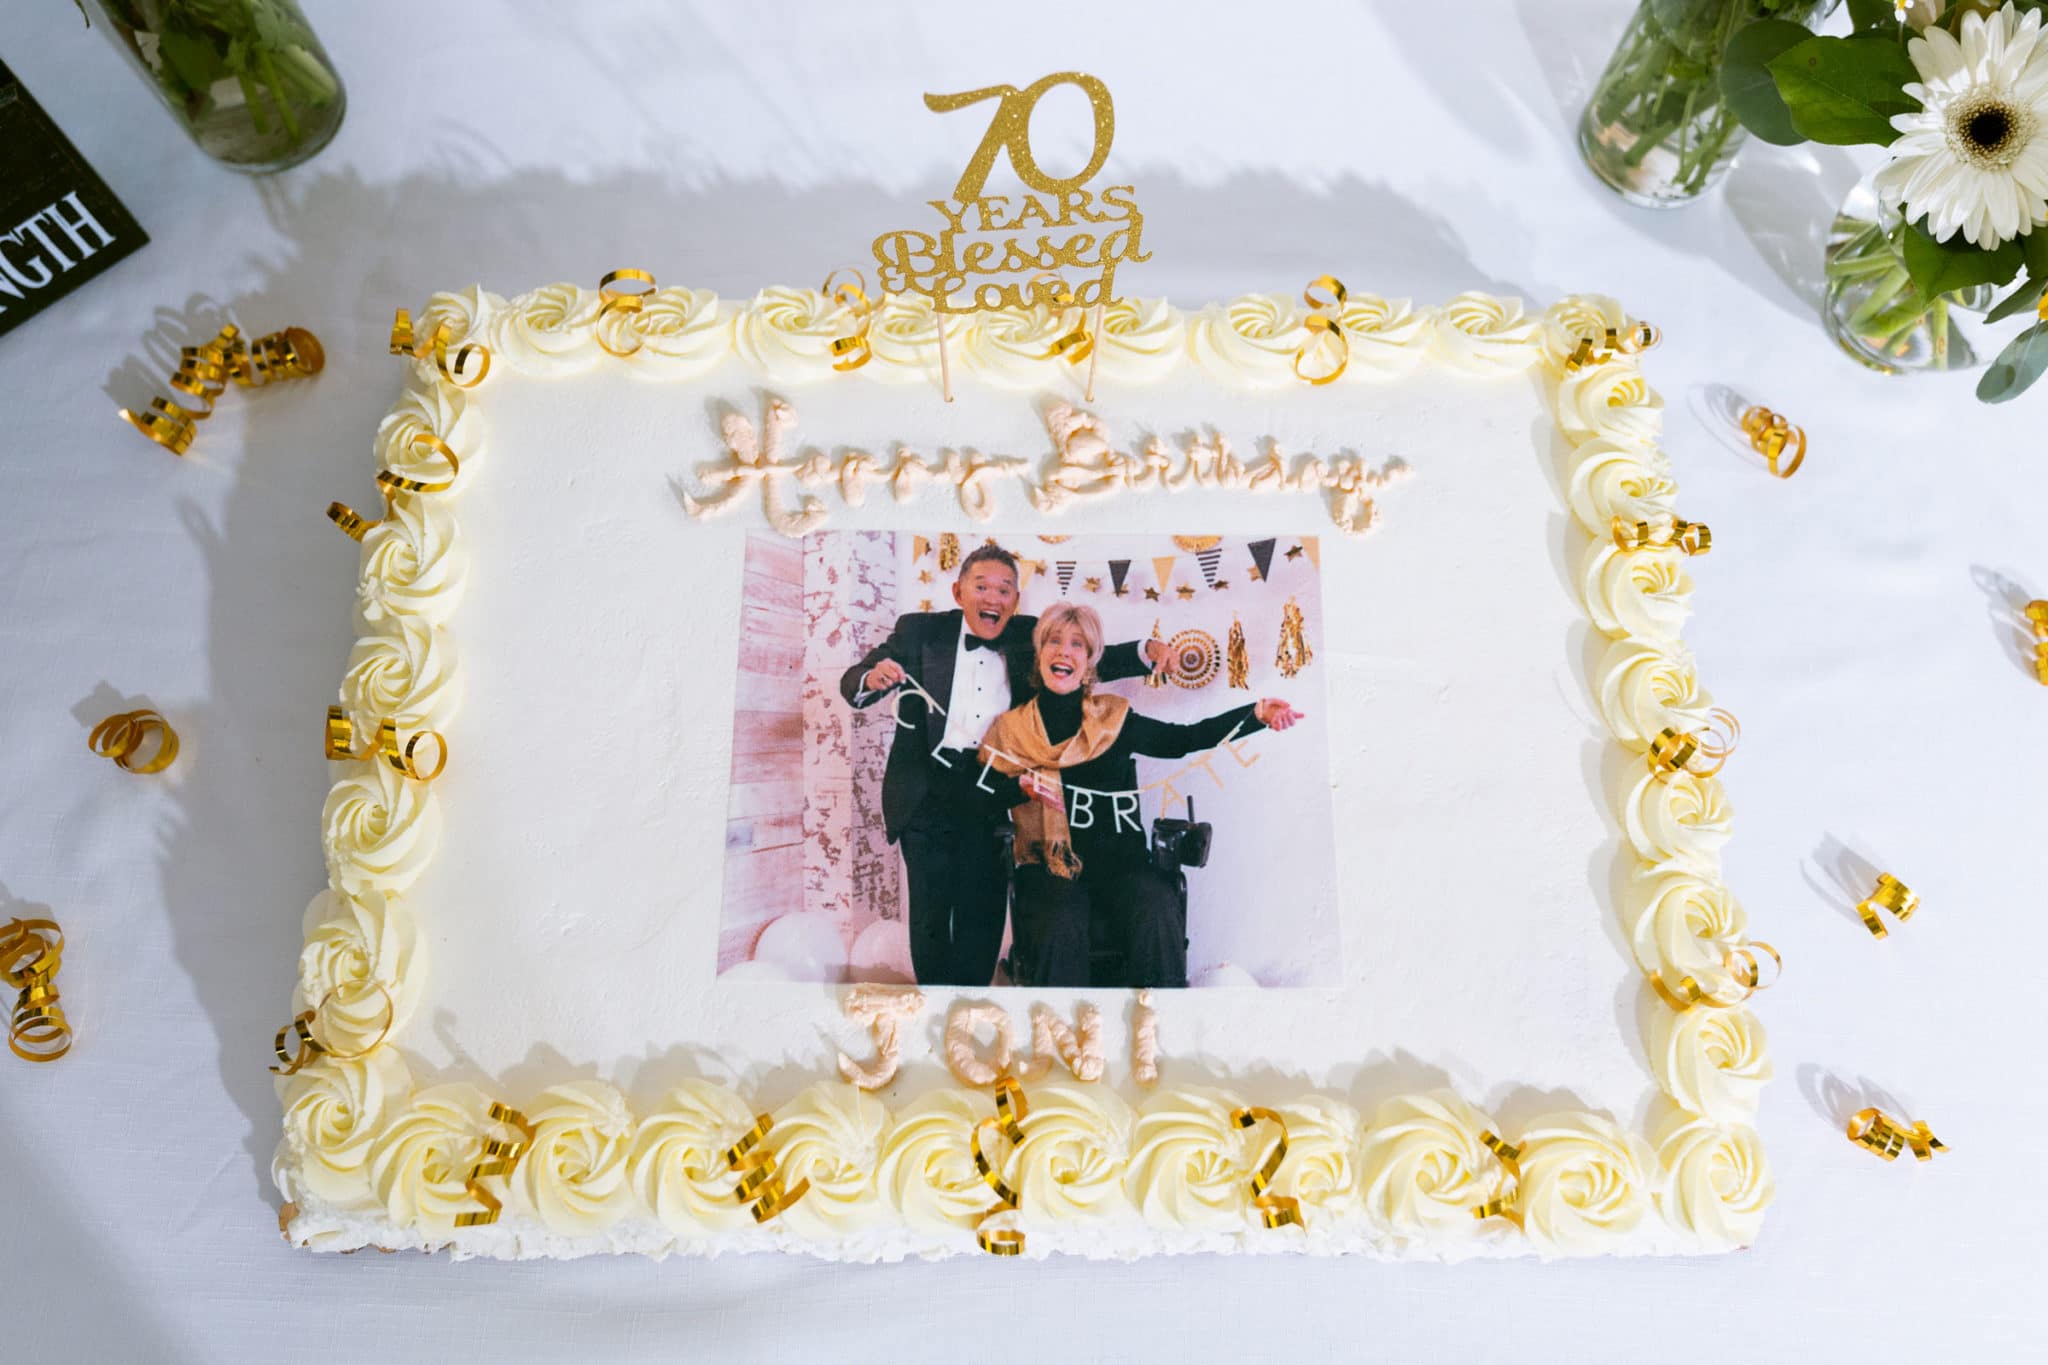 Close up of a birthday cake with an image of Joni and Ken holding a sign that says "celebrate" on it.